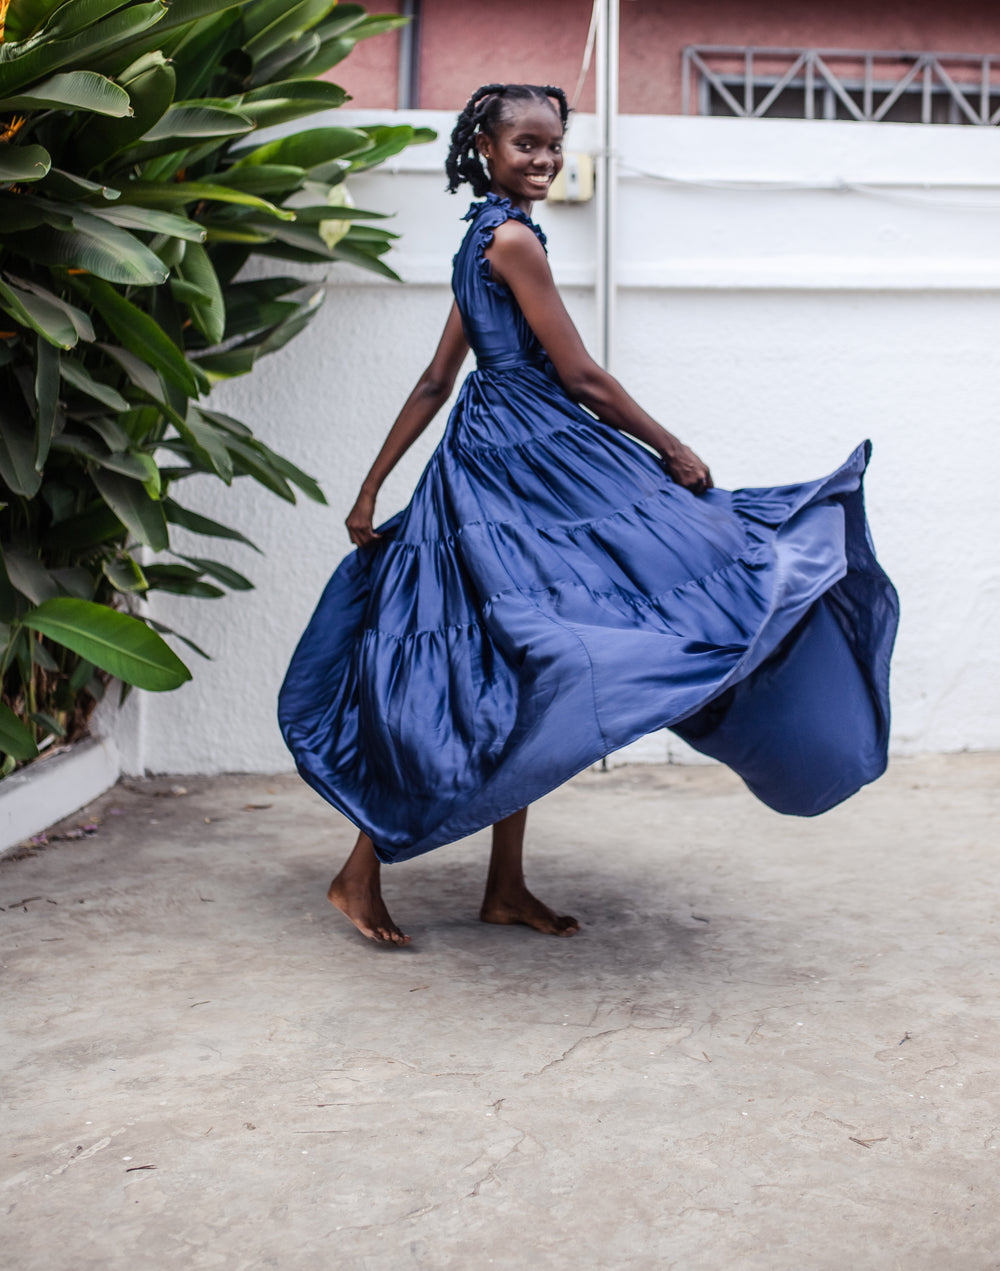 day-dress, fun, gown, statement, denim, dress, formal, color, print, vibrant, party, gala, pockets, cotton, breathable, light, vogue, fashion, silk, silky, smooth, drama, Fashion, West Africa, Gift, travel, vacation, lounge, comfy, family, trip, luxury, Ghana, new arrivals, Studio 189, Cotton, clothing, comfy, chic